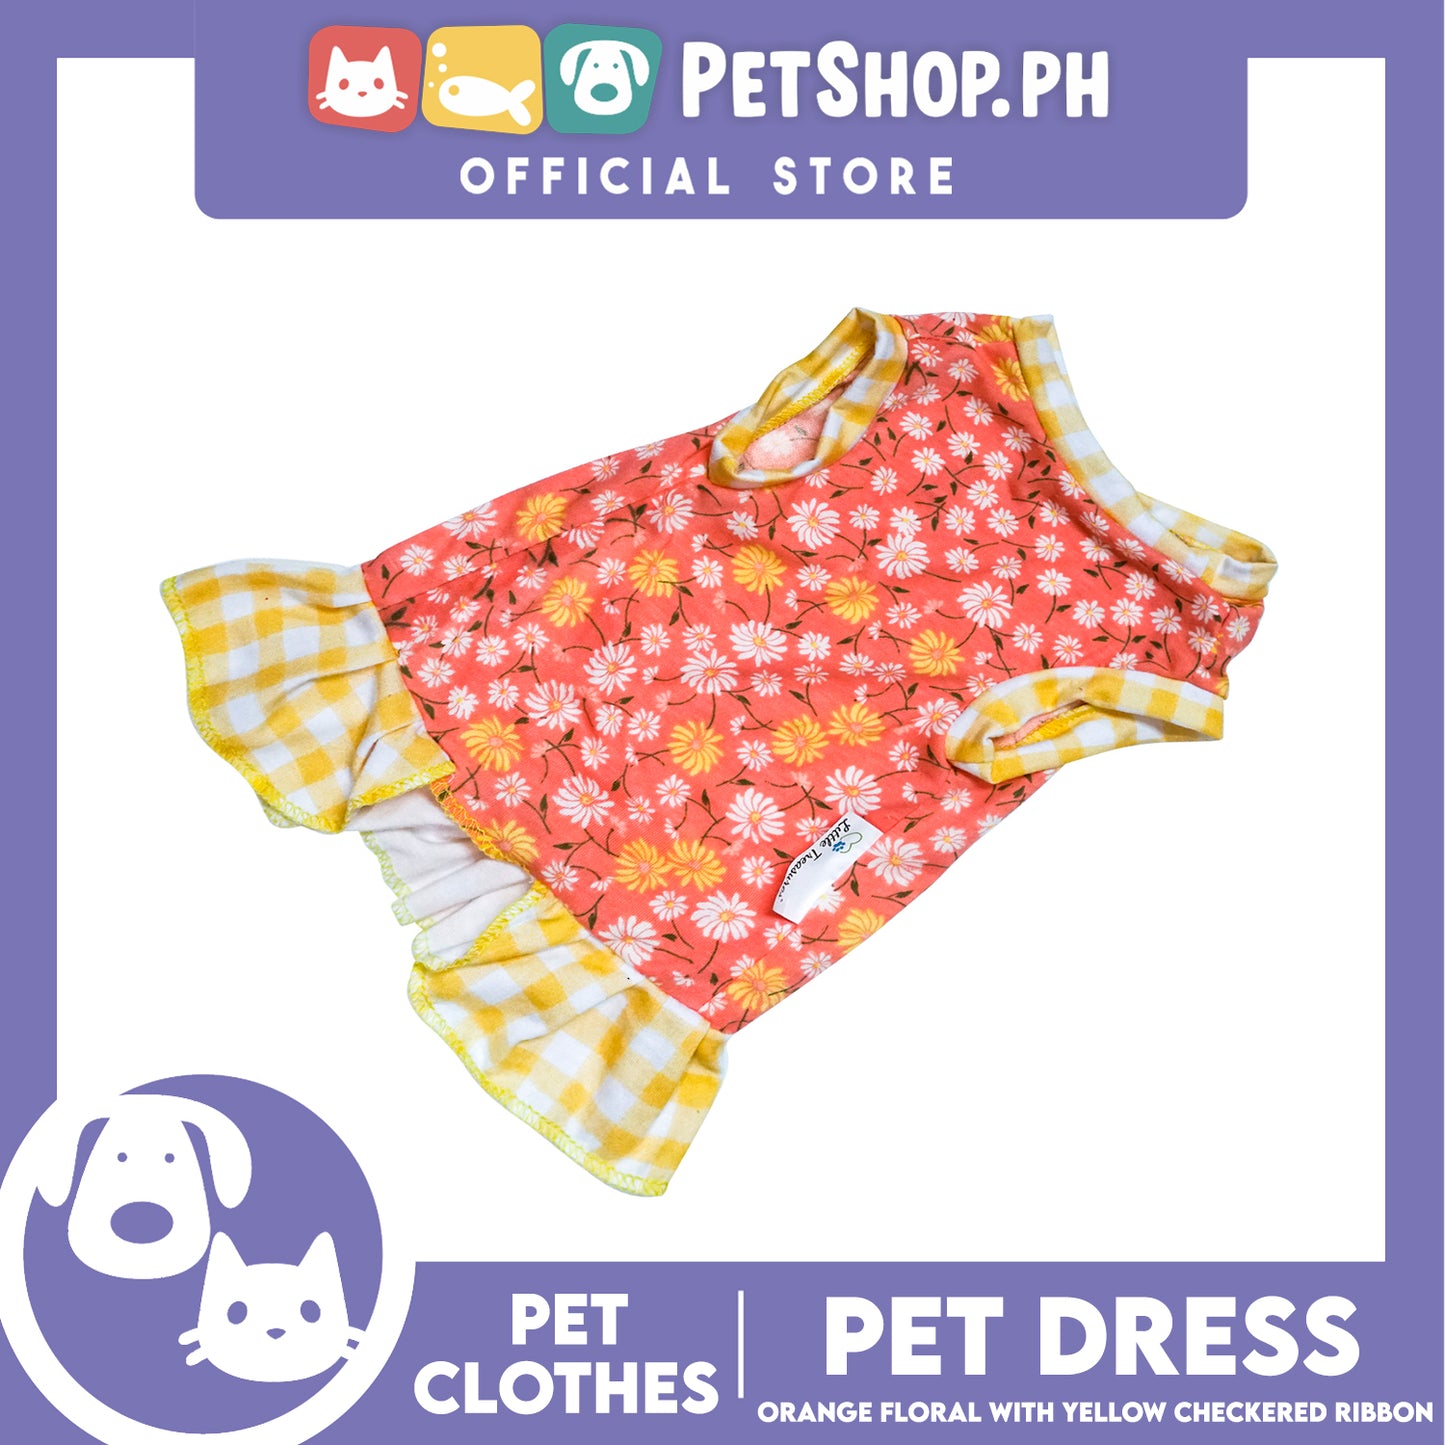 Pet Dress Orange Floral Yellow Checkered with Ribbon (Small) Pet Dress Clothes Perfect for Dogs